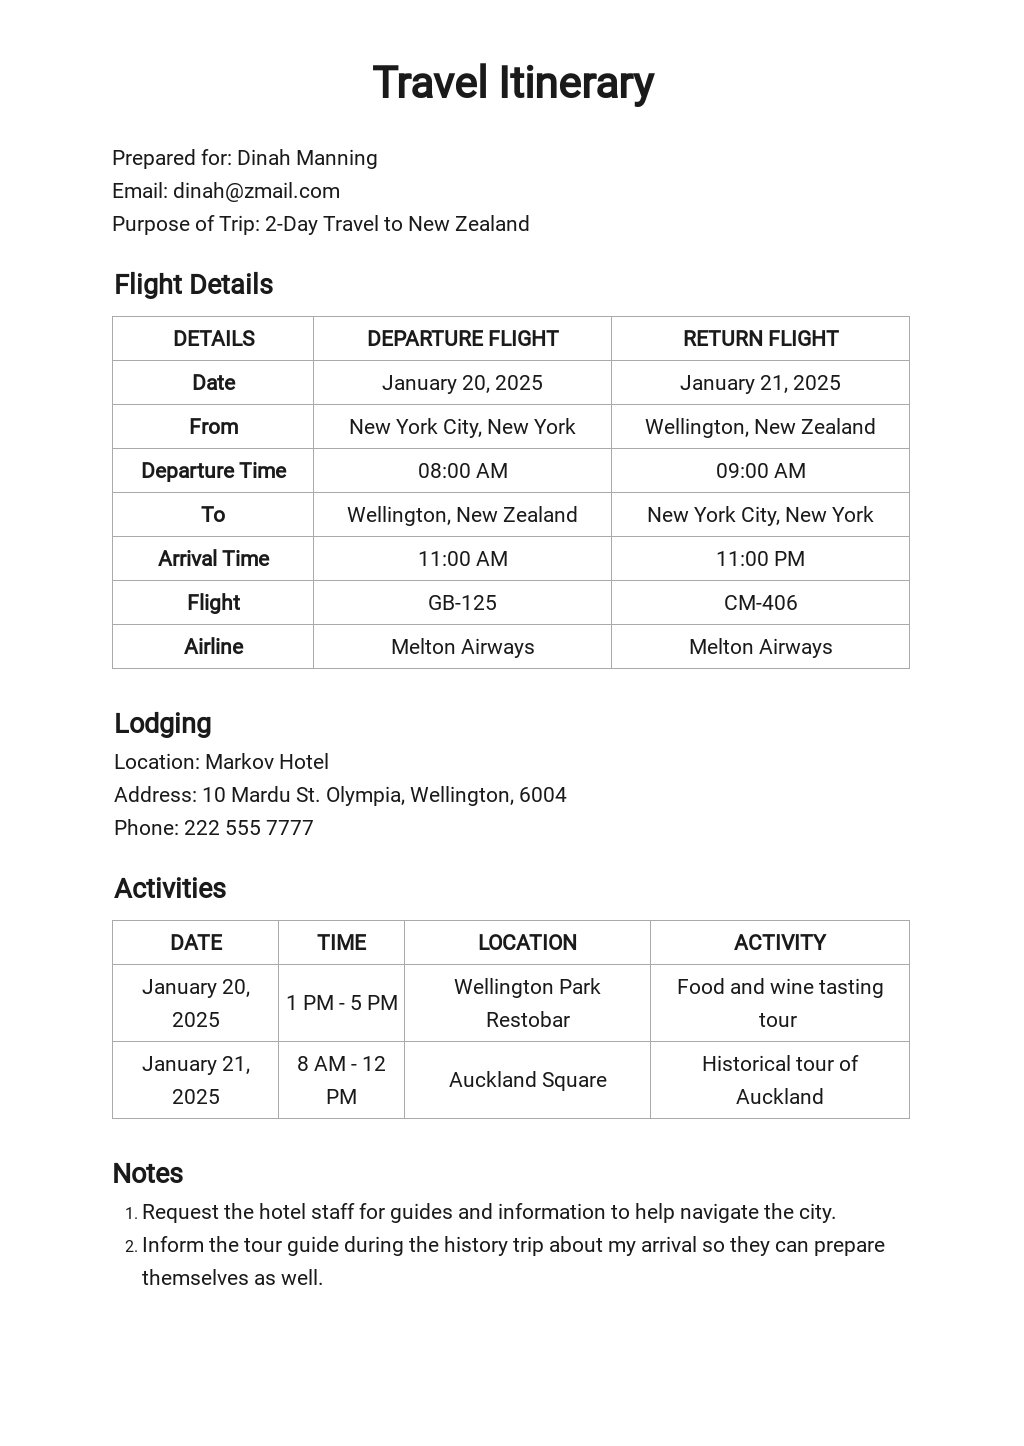 Travel Itinerary Spreadsheet Template in Google Docs, Word